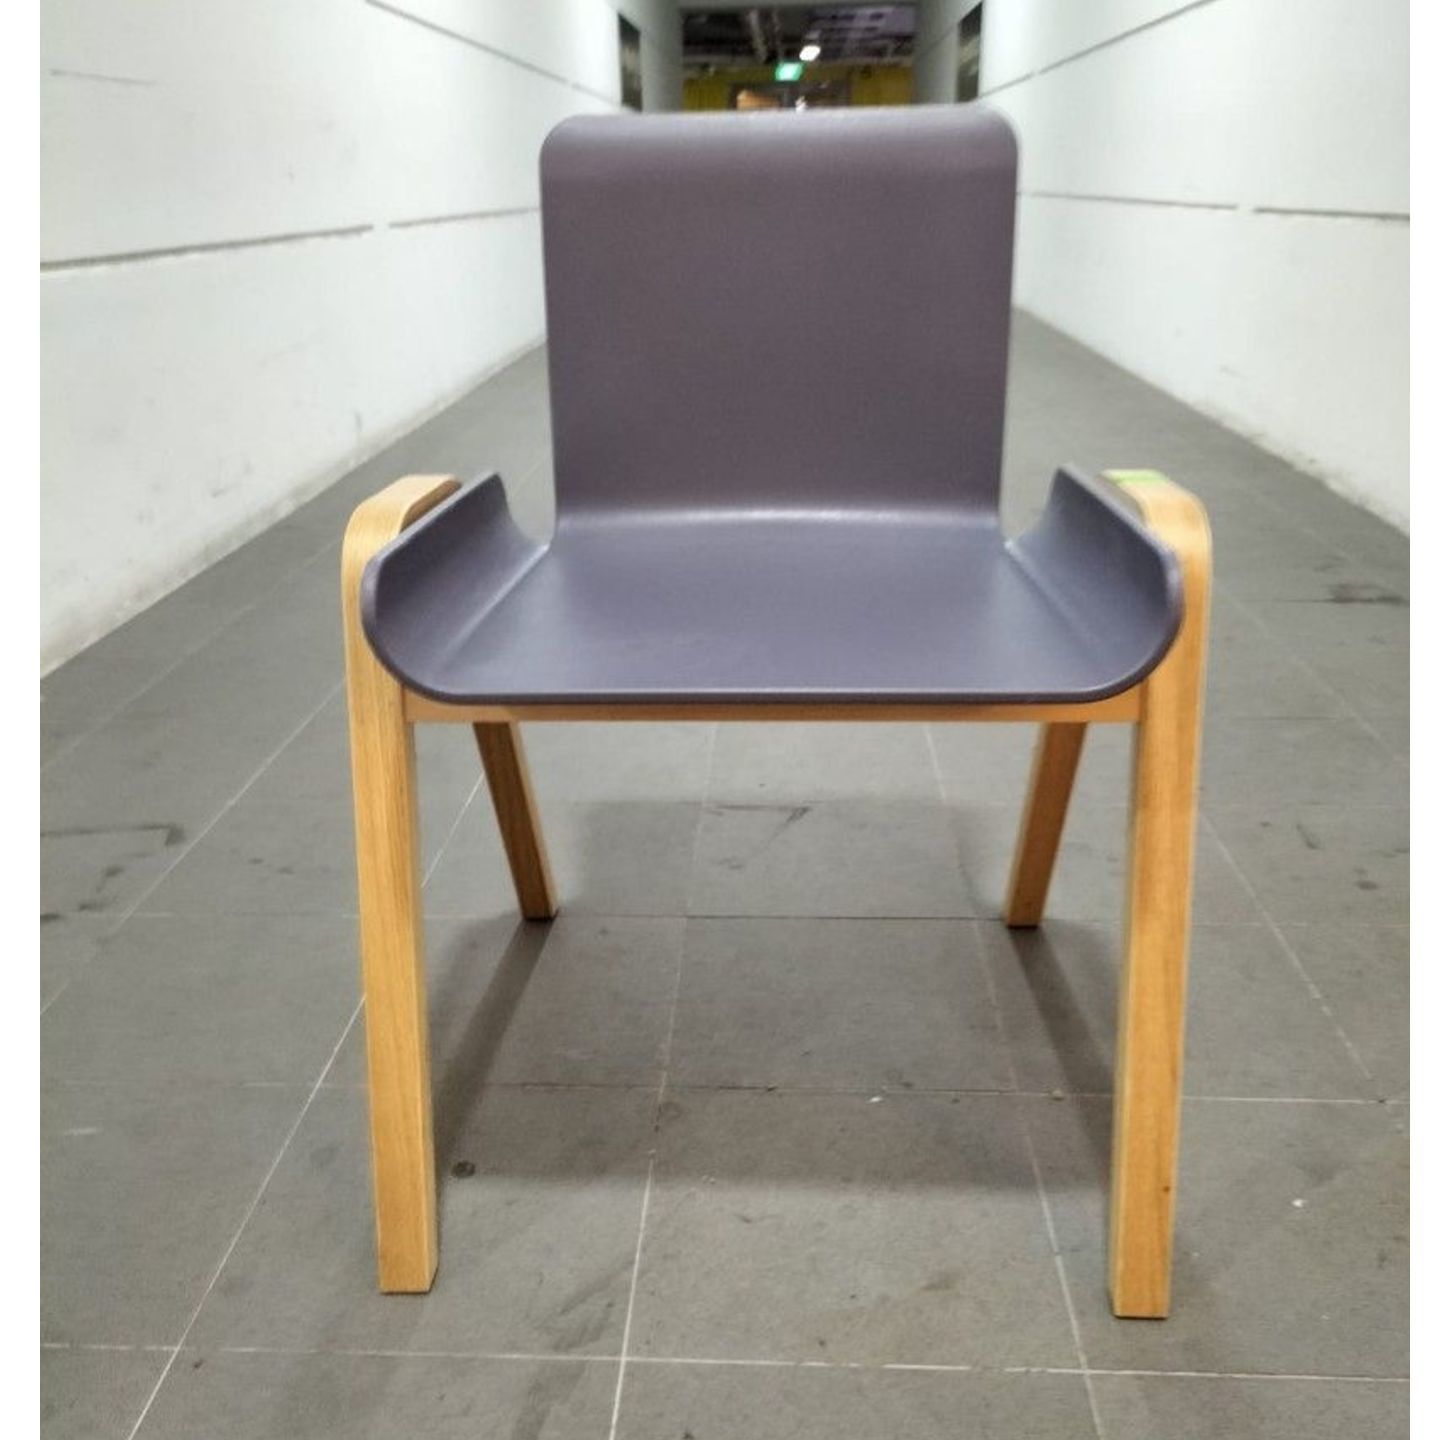 CAYMAN Chair in GREY - one piece only